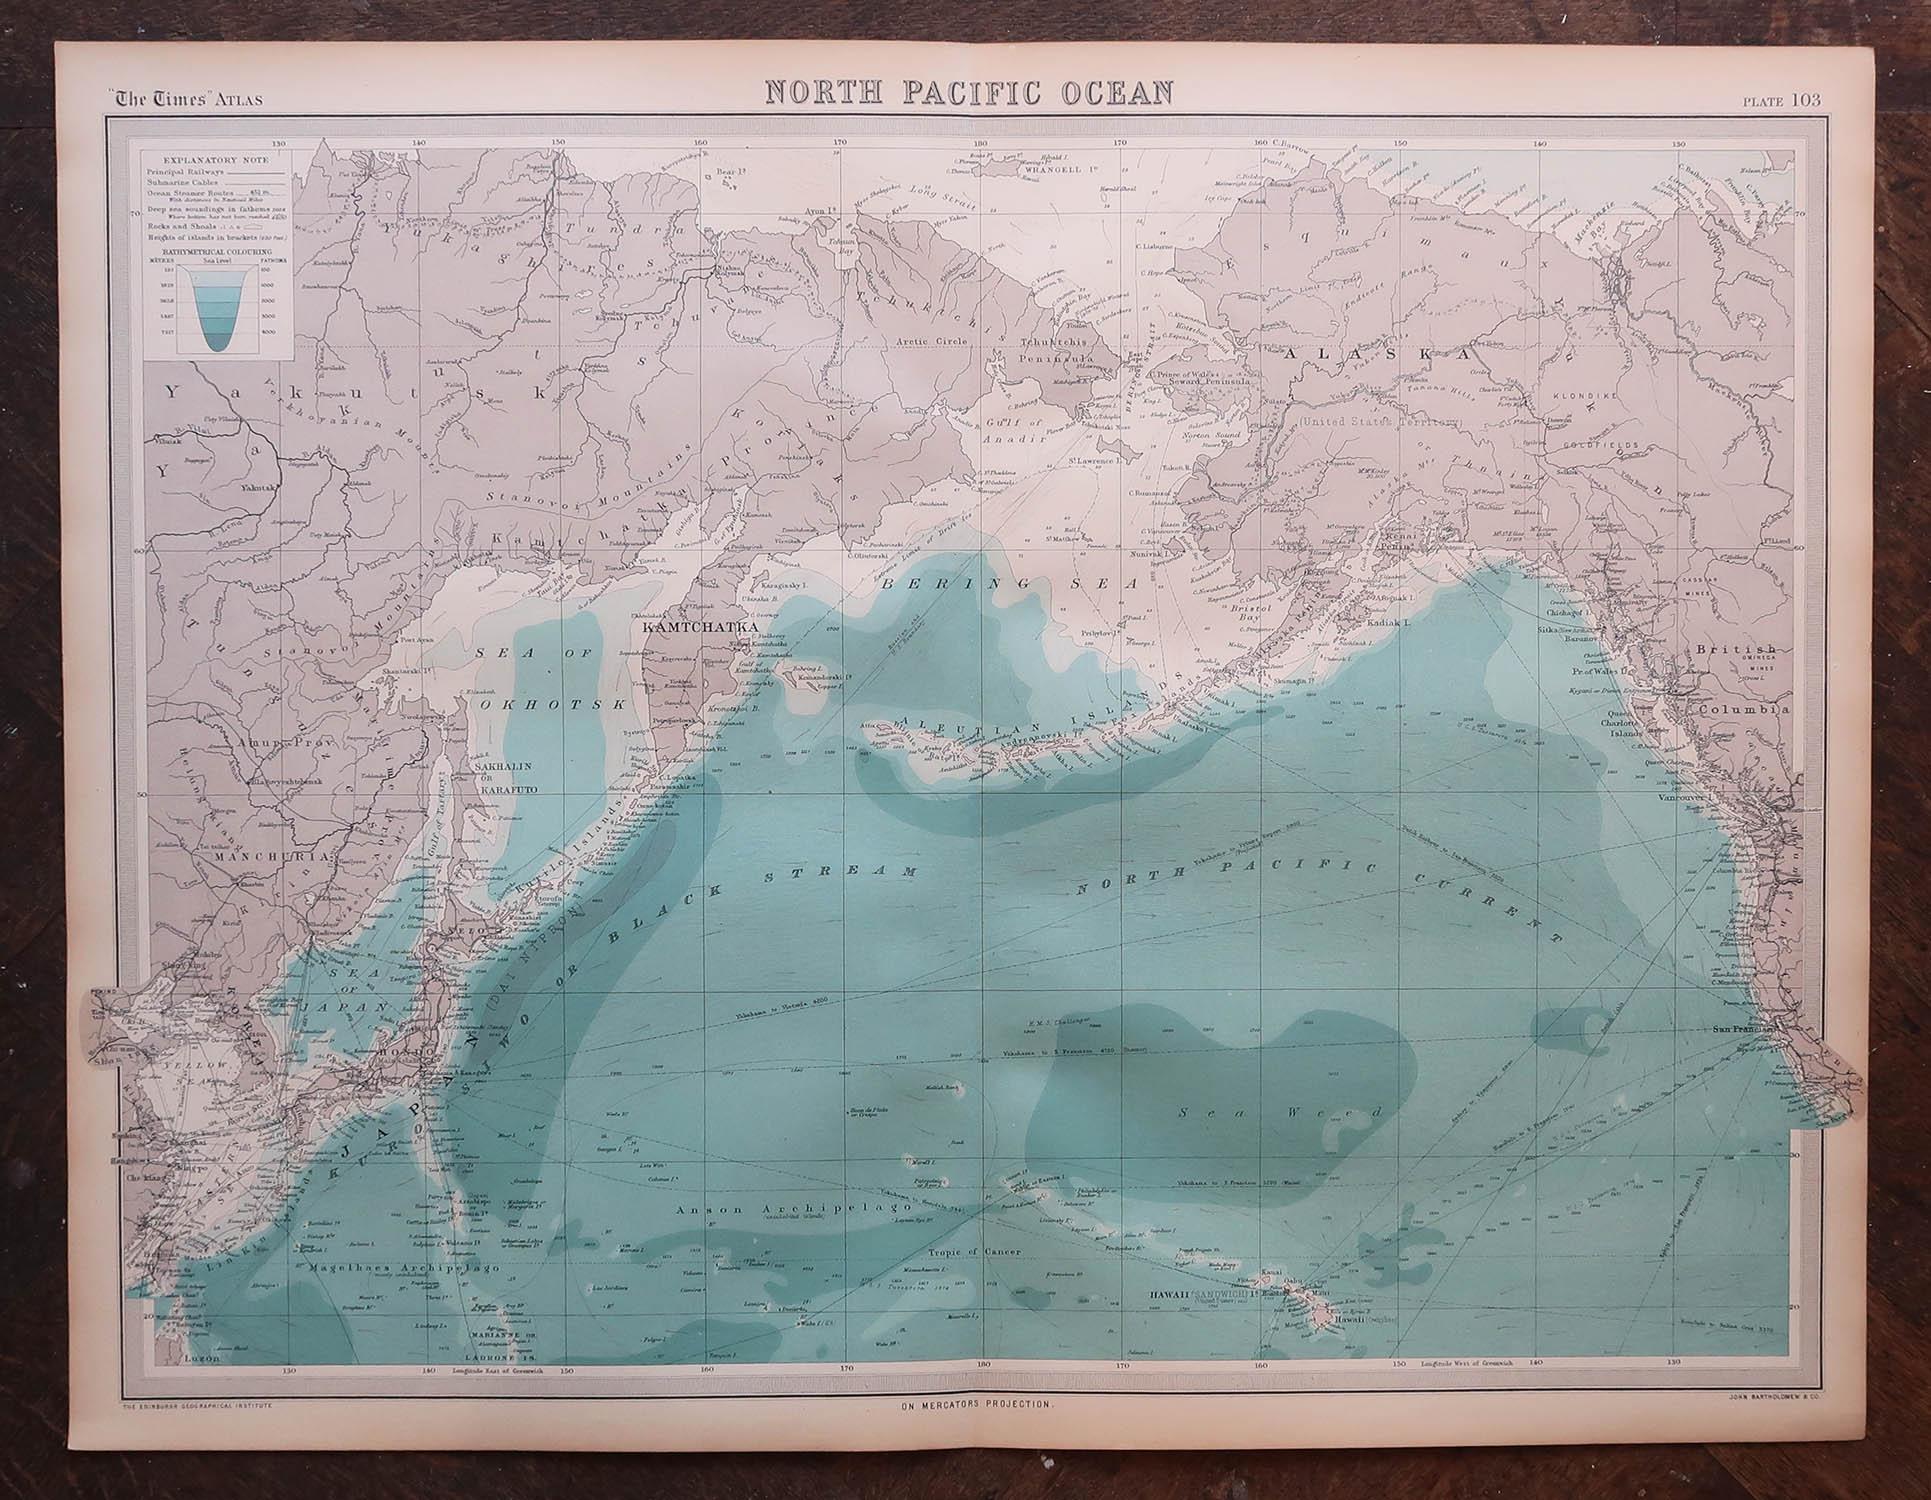 5 great maps or charts of the oceans

I particularly like the color of these maps

Unframed

Original color

By John Bartholomew and Co. Edinburgh Geographical Institute

Published, circa 1920

Free shipping.